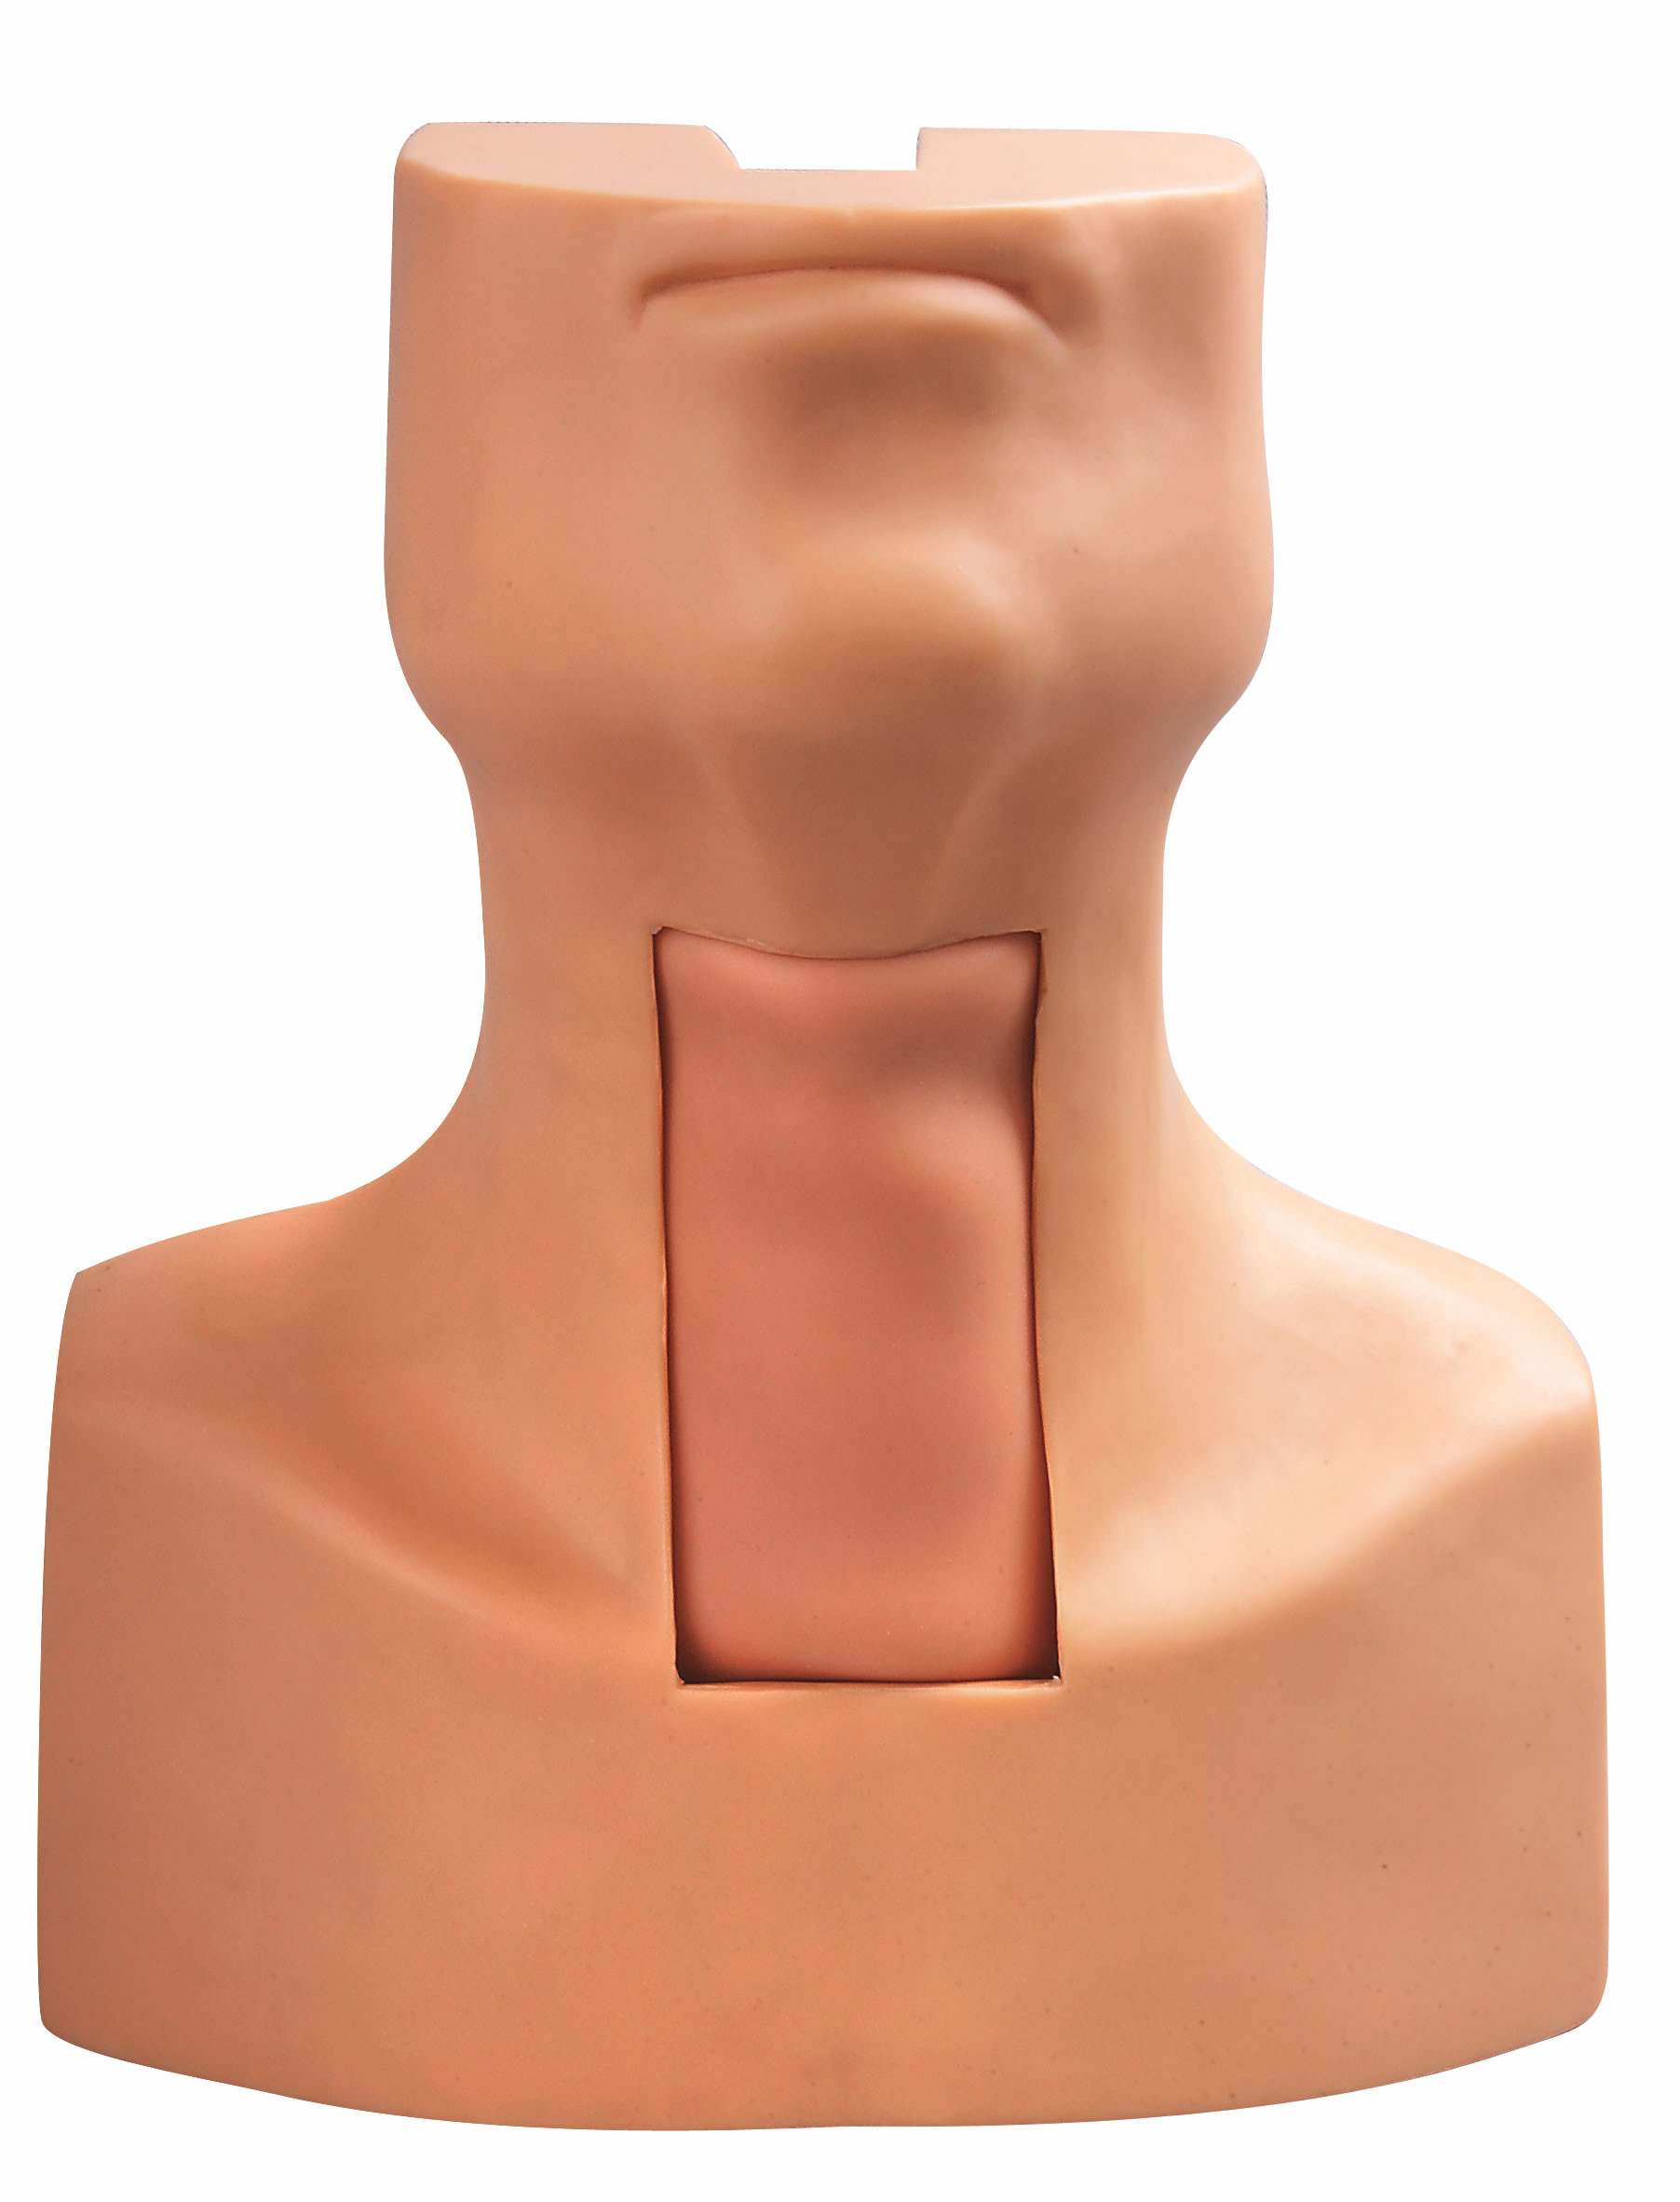 Tracheostomy Puncture Intubation Model with Simulated Trachea and Neck Skin for Training